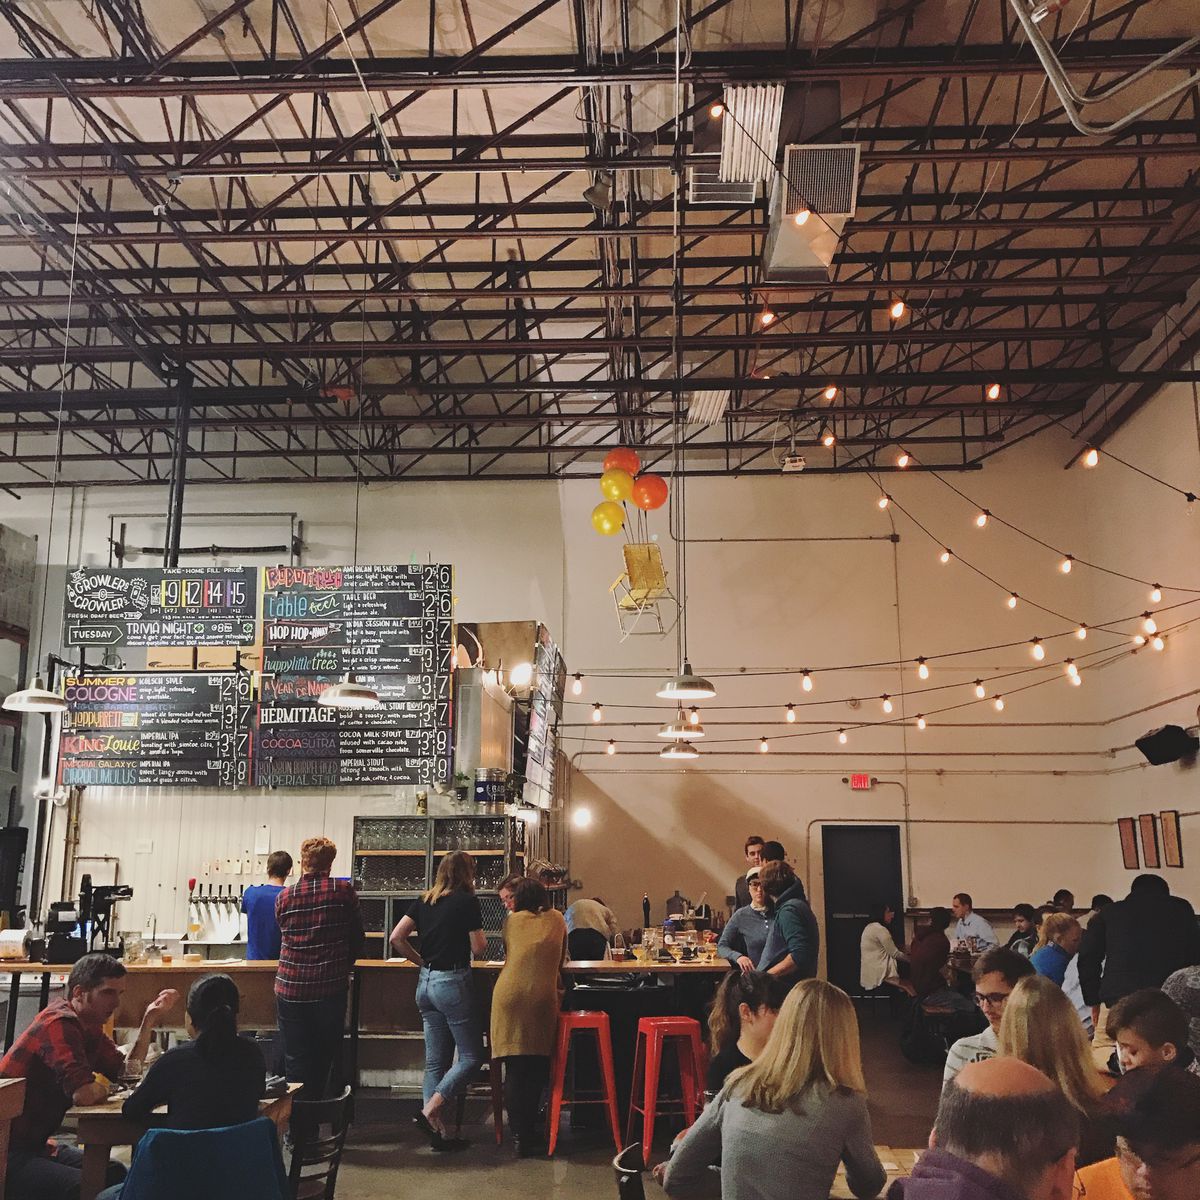 Towering ceilings accommodate a chalkboard beer list, a bar, and table seating inside a brewery